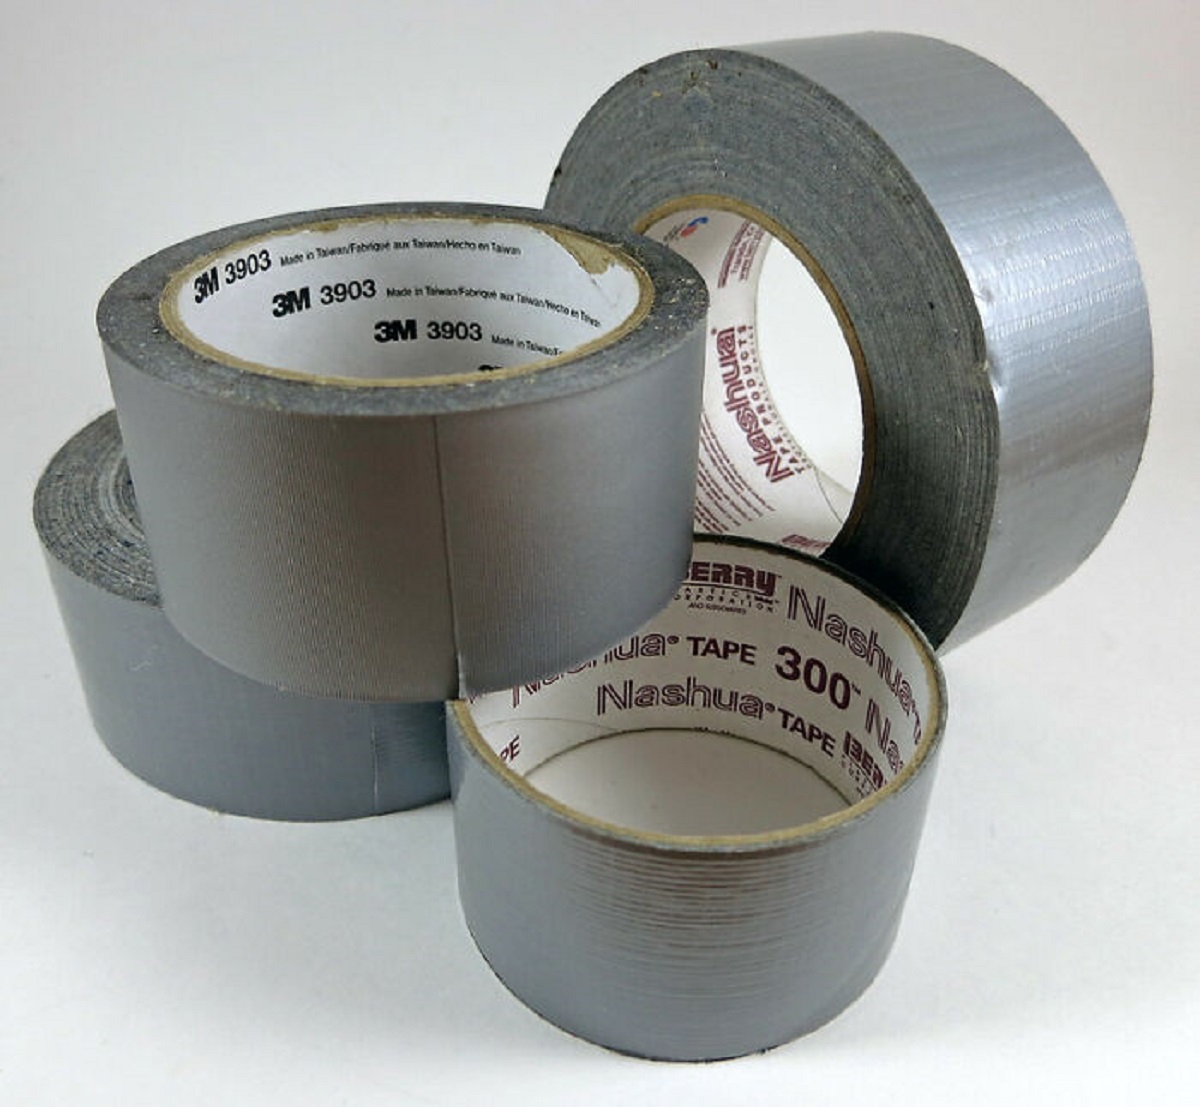 I have used duct tape and electrical tape as a band aid. Just don't use carpet seam tape. I knew a carpet installer once that did that, and ended up with blood poisoning that almost killed him.